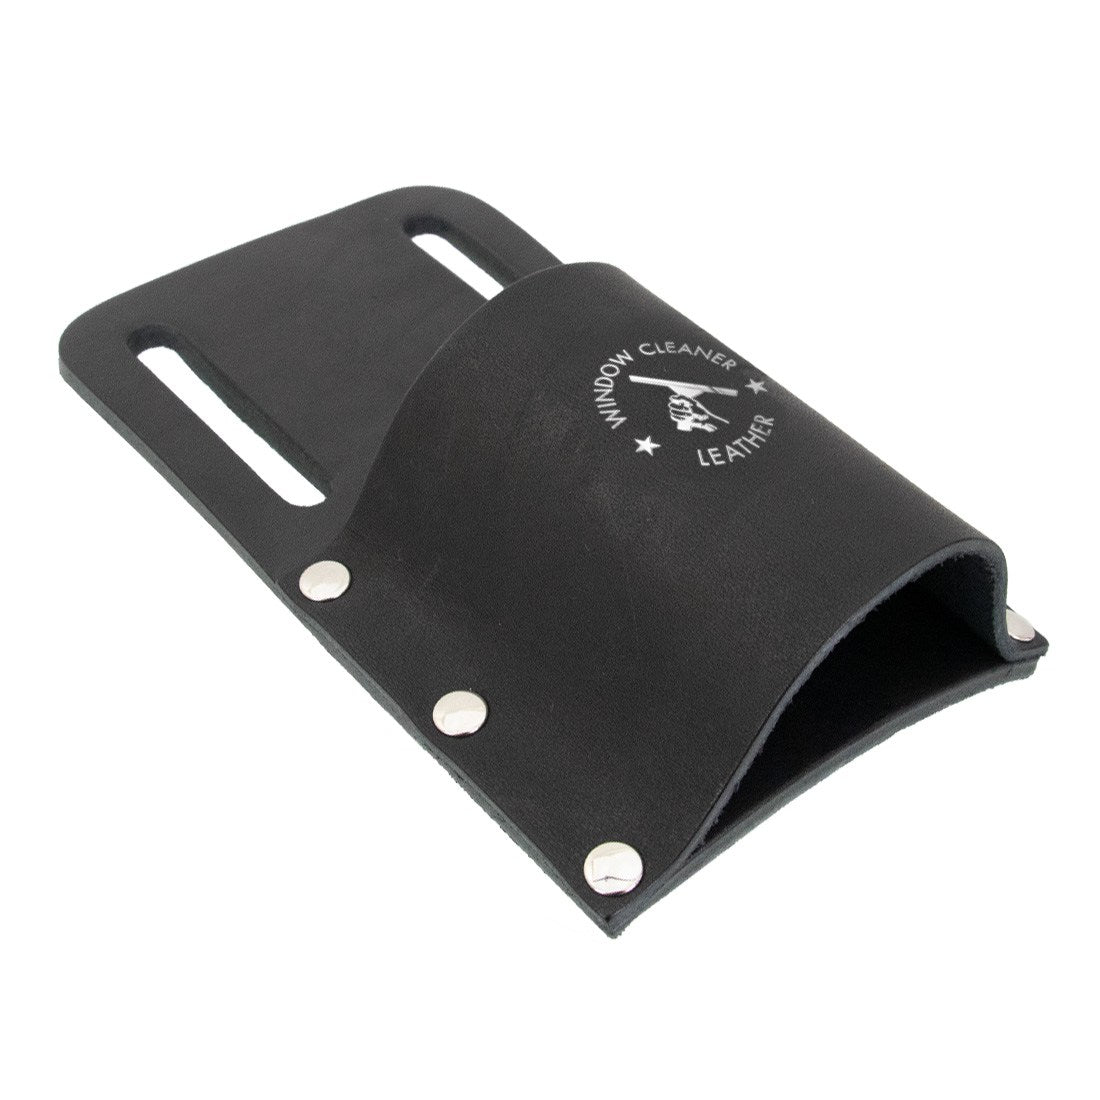 Window Cleaner Leather Model 3, Holsters